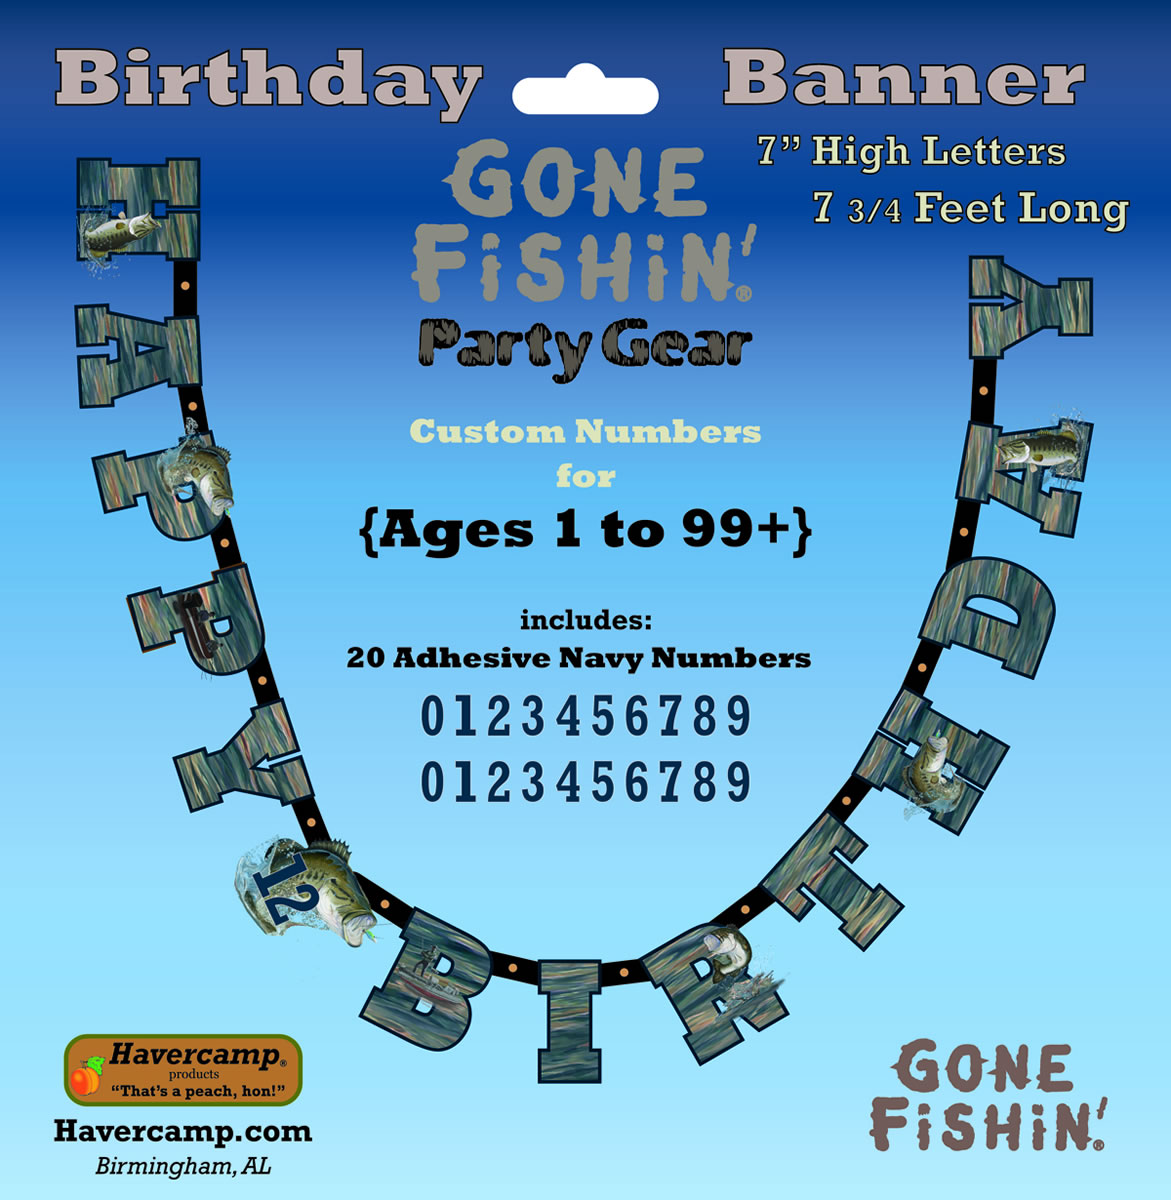 Gone Fishin' Happy Birthday Banner - Party Makers